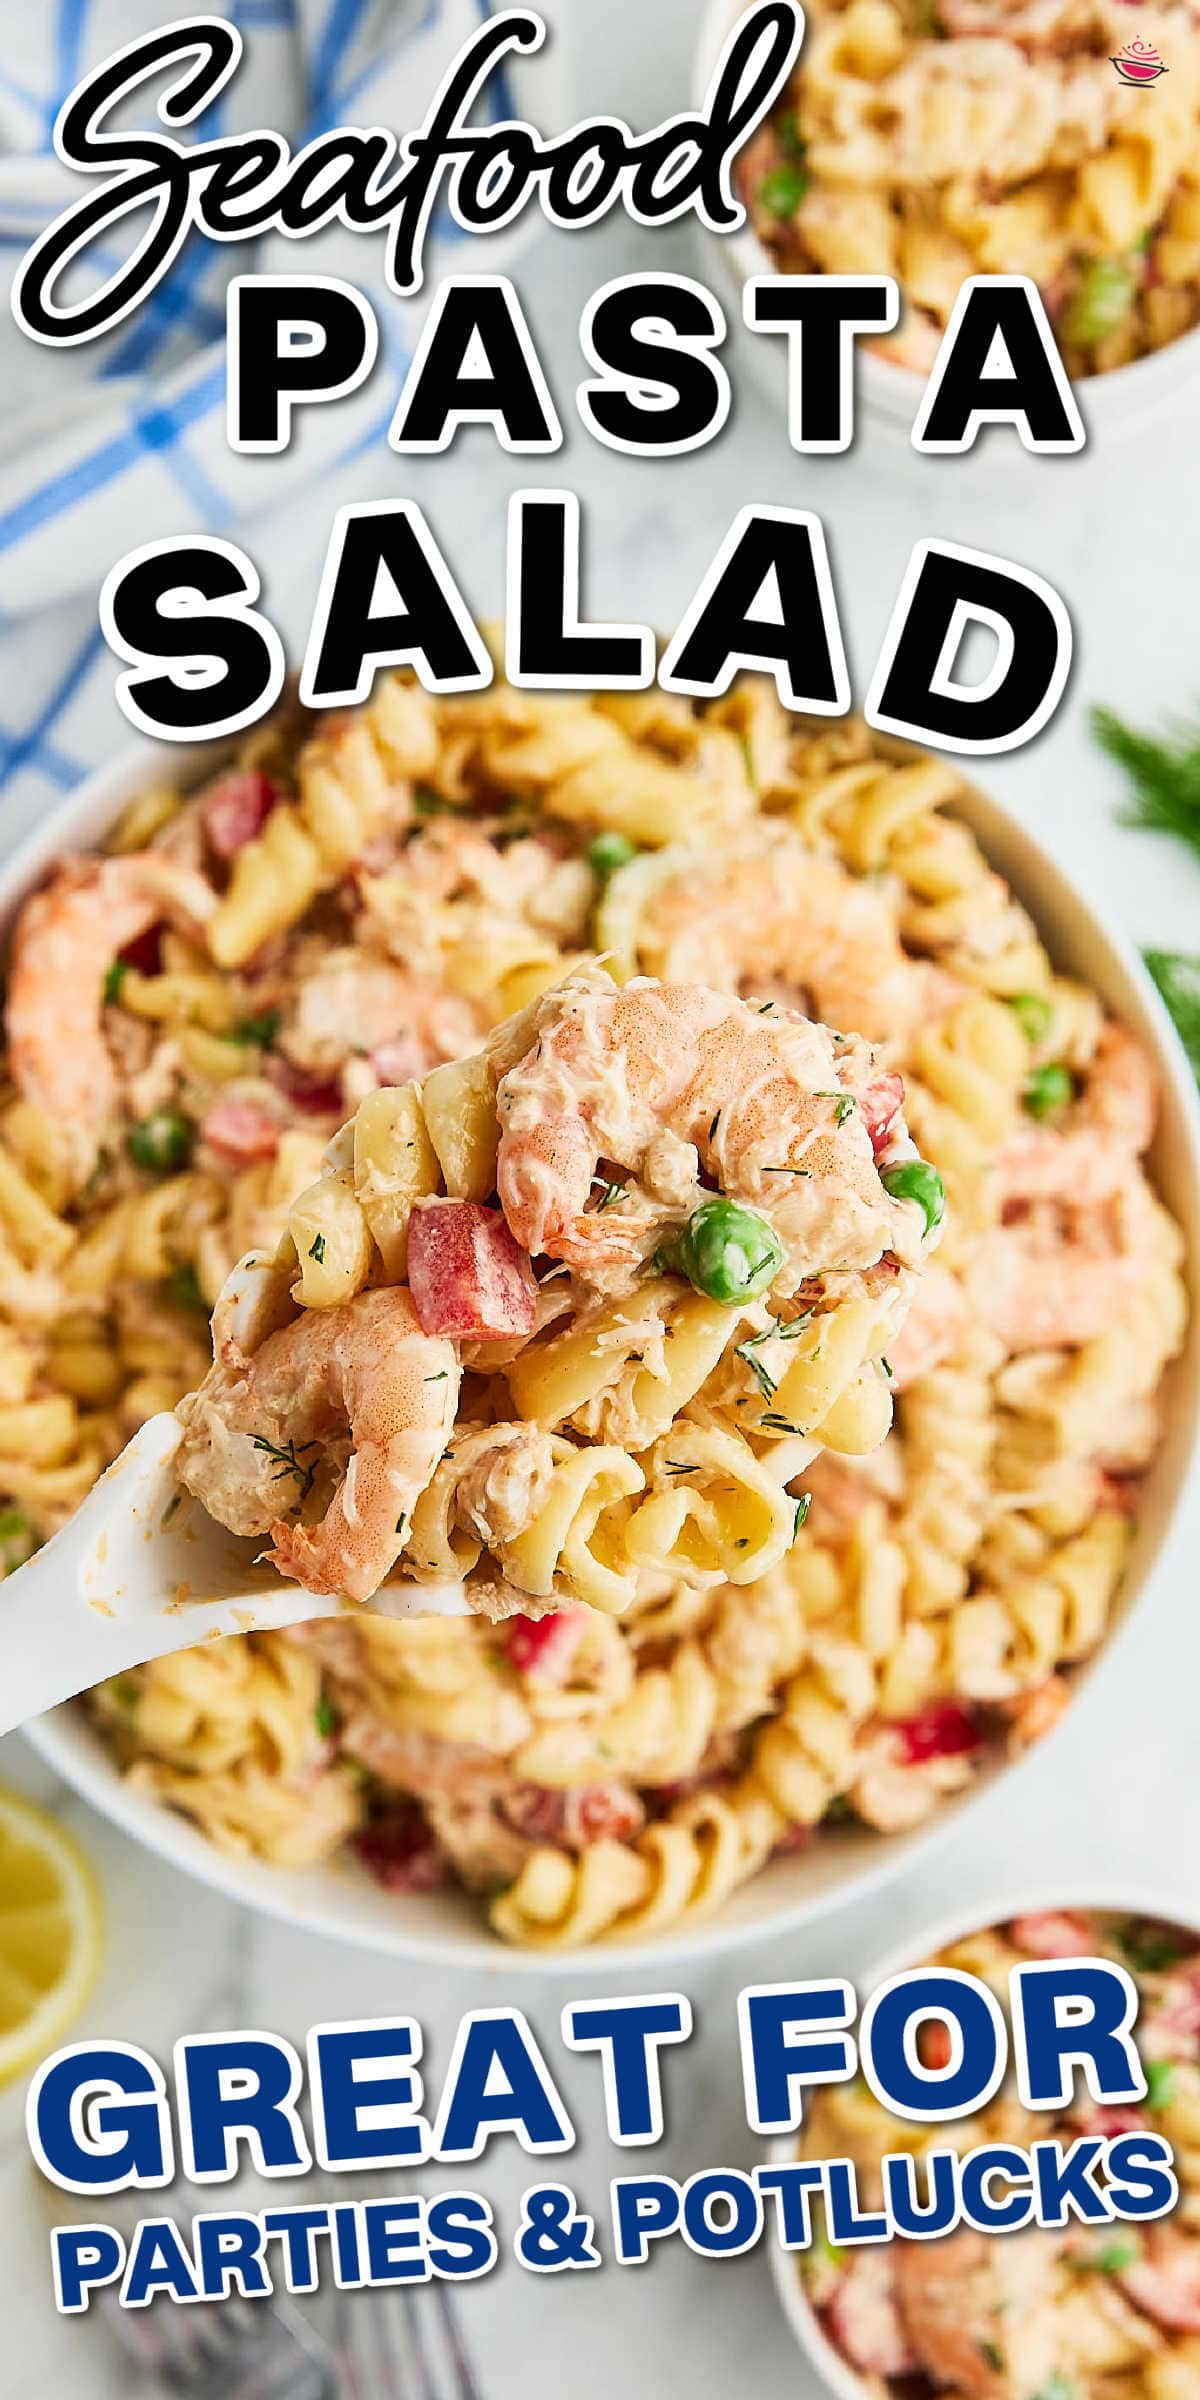 Dive into our crowd-pleasing Seafood Pasta Salad! Loaded with succulent shrimp, juicy crab meat, and fresh, vibrant veggies, it's sure to make your next party a hit. #cherrfulcook #pastaSalad #seafoodpastasalad #shrimp #lumpcrabmeat #easyrecipe via @cheerfulcook